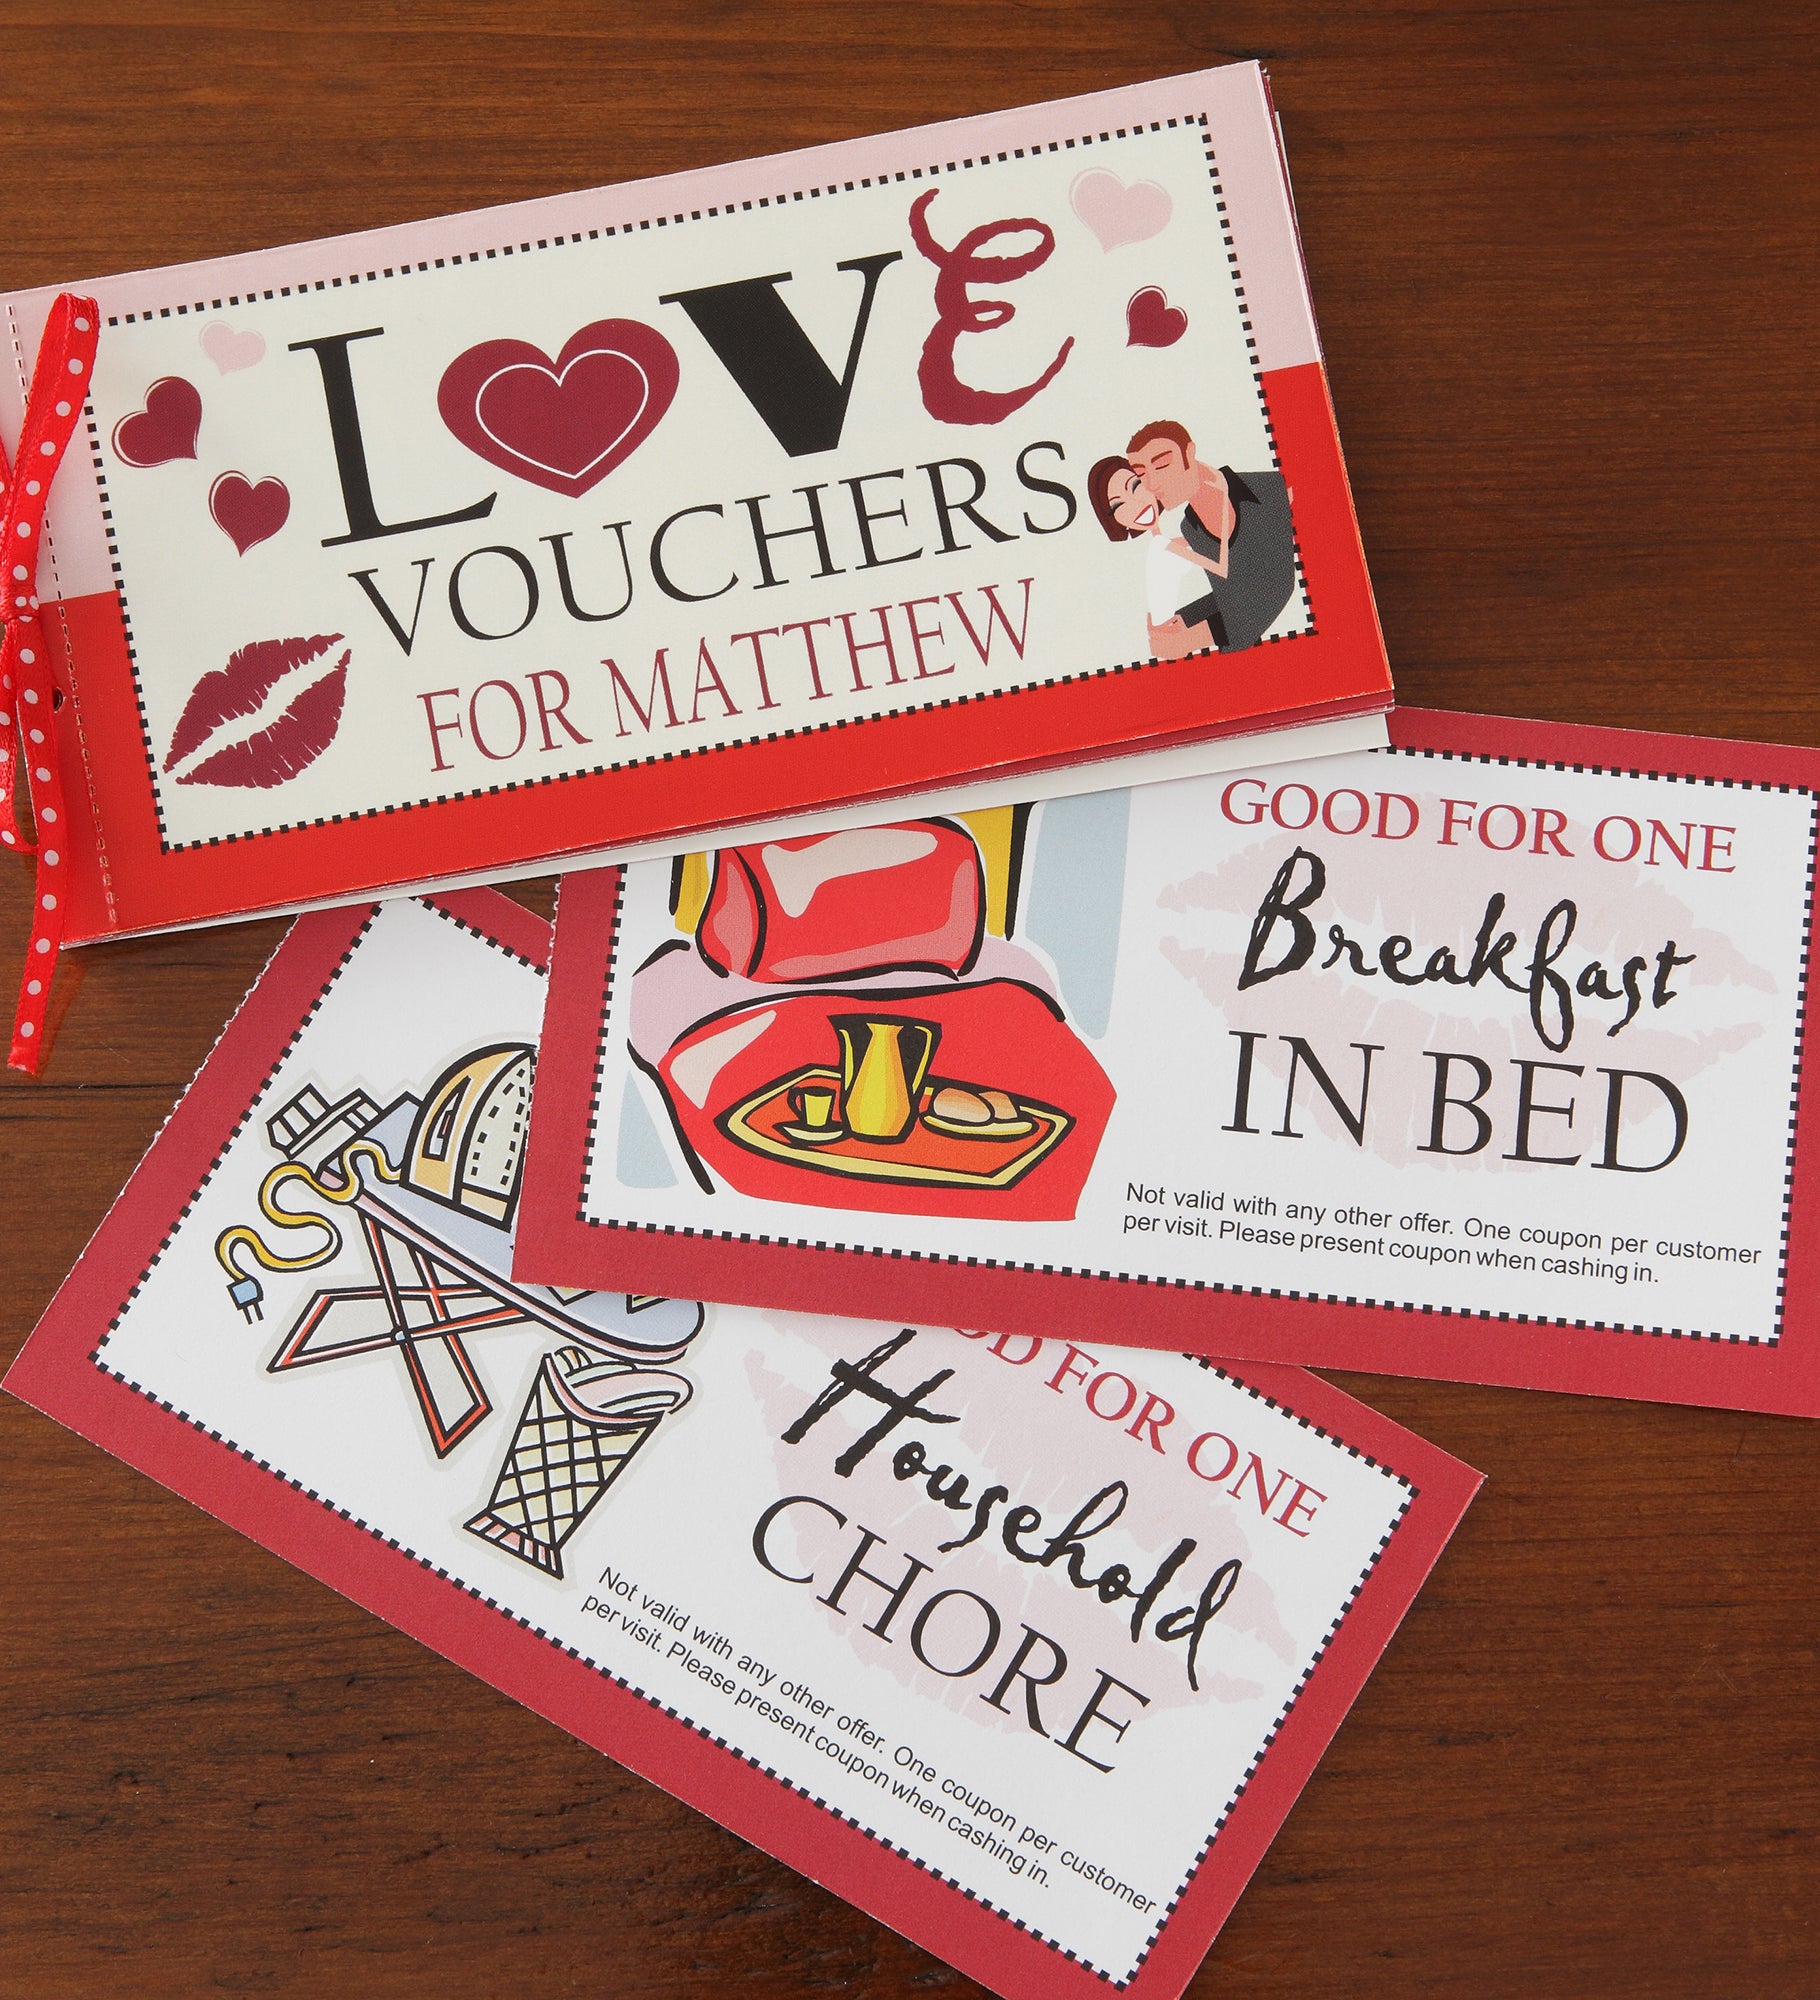 Personalized Vouchers Of Love